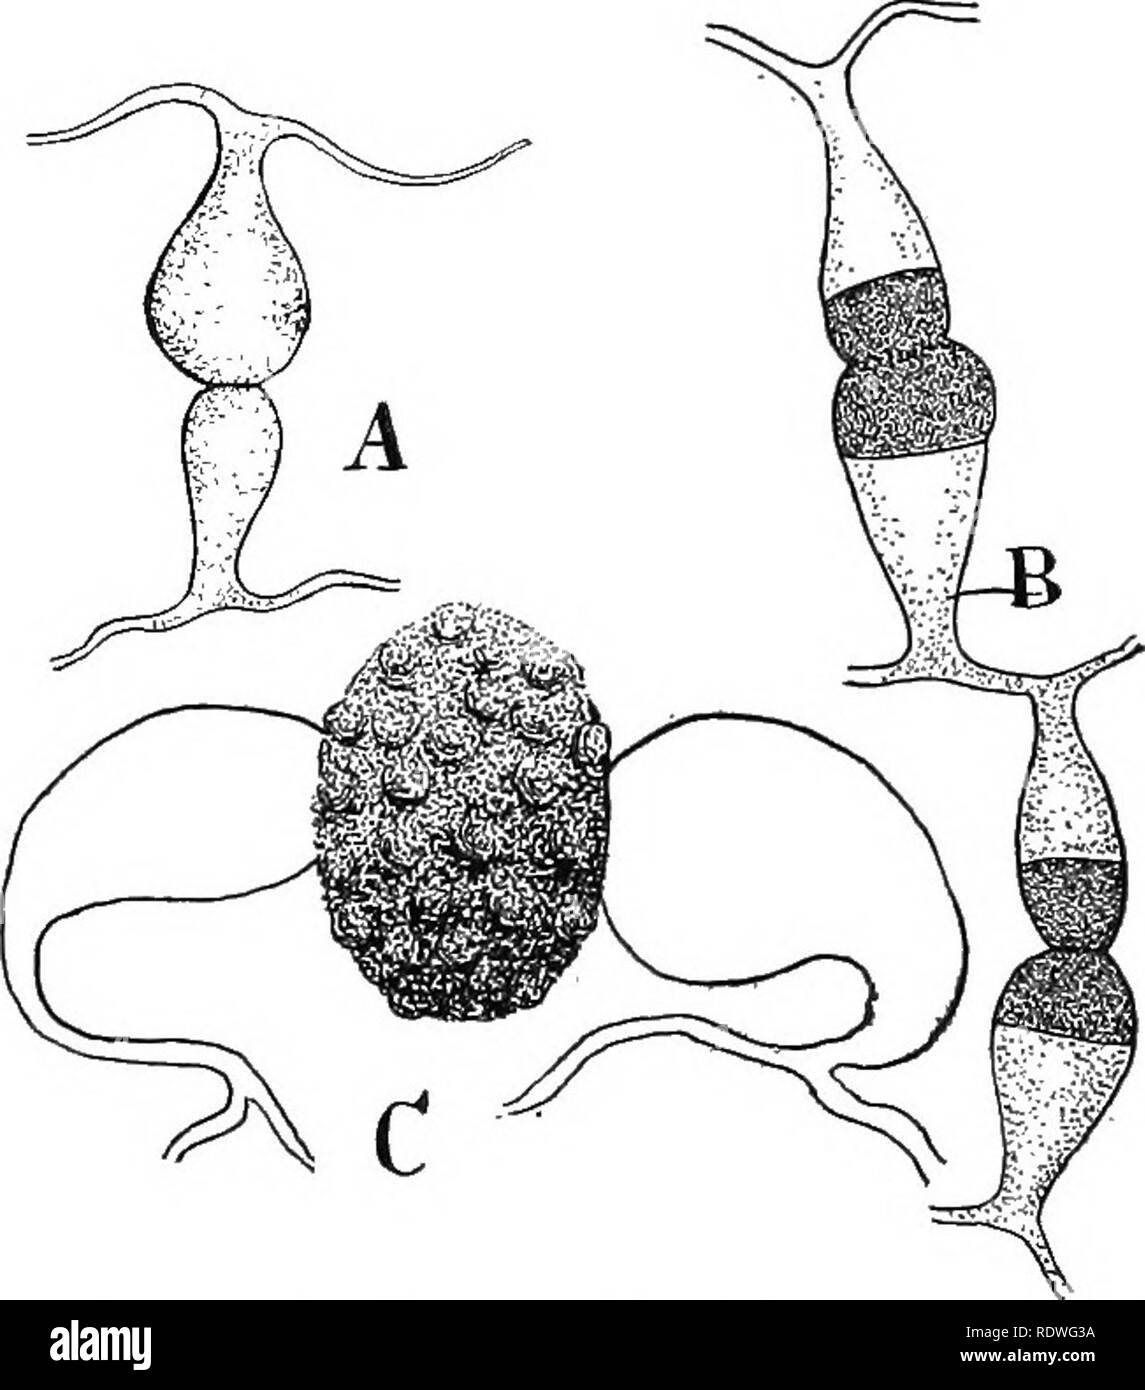 . Nature and development of plants. Botany. 226 SPORANGIUM OF PHILOBOLUS in this mode of scattering the spores is seen in a related form, Pilobolus, which is of common occurrence upon horse dung. Here the wall of the sporangium, unlike Rhizopus, is quite firm and becomes mucilaginous only at the point of contacfwith the stalk that bears it. Owing to the accumulation of water in the stalk such a pressure is finally set up as to rupture it at the mucilaginous point and so the sporangium with its contained spores is hurled considerable distance^—often quite one meter. The sporangia bearing stalks Stock Photo